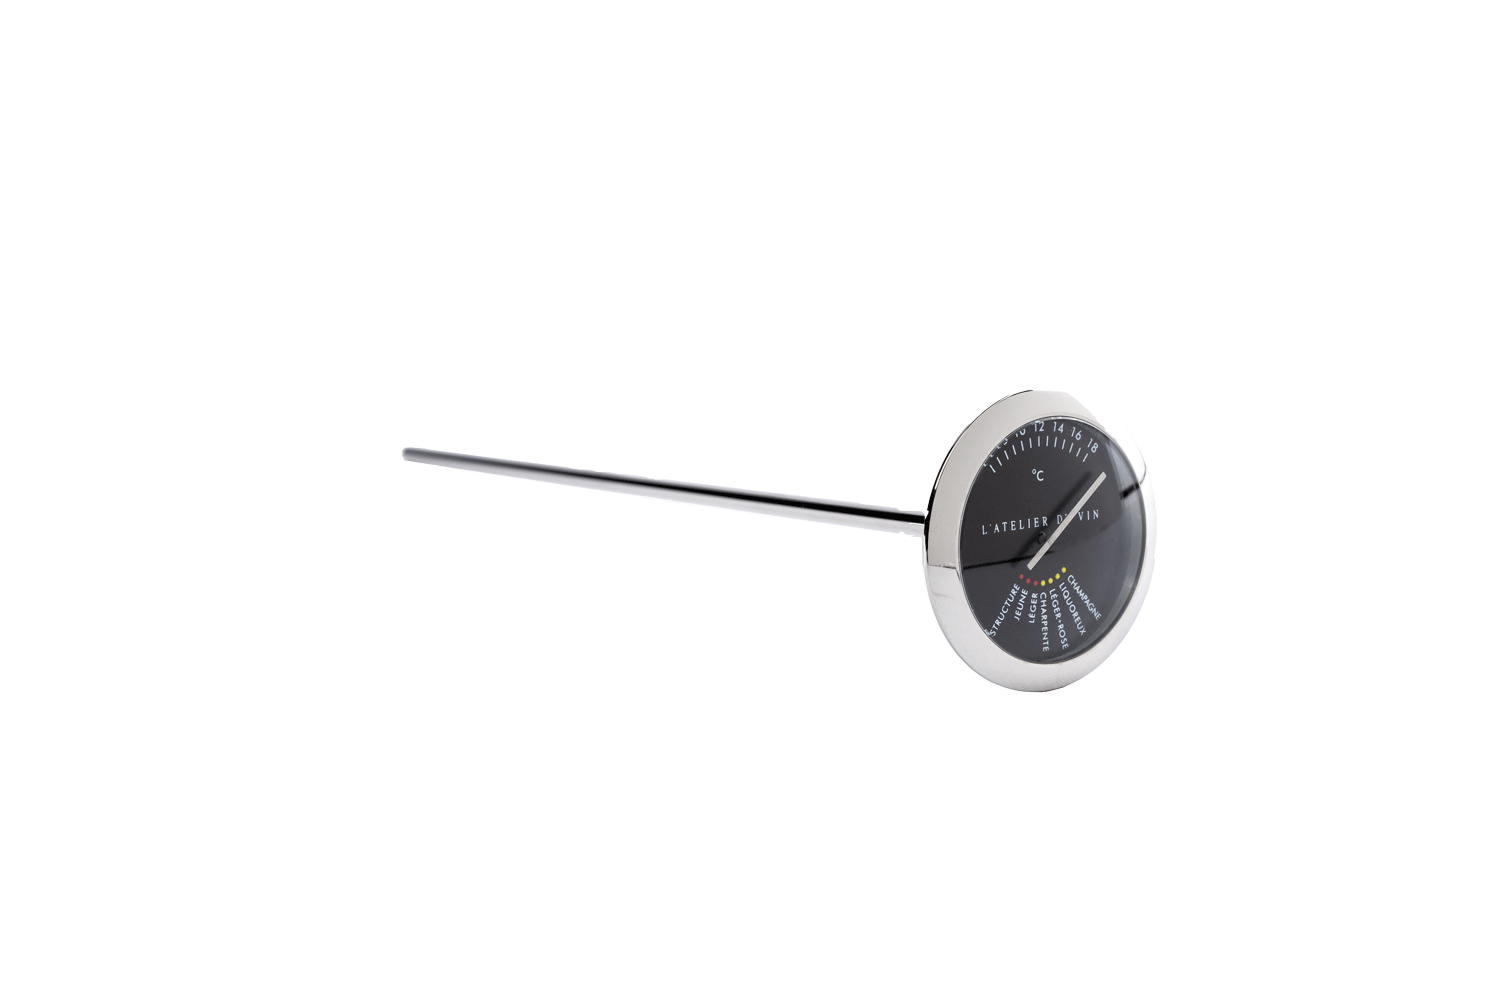 Paderno World Cuisine LAtelier Du Vin Wine Thermometer Stainless Steel by Paderno World Cuisine 